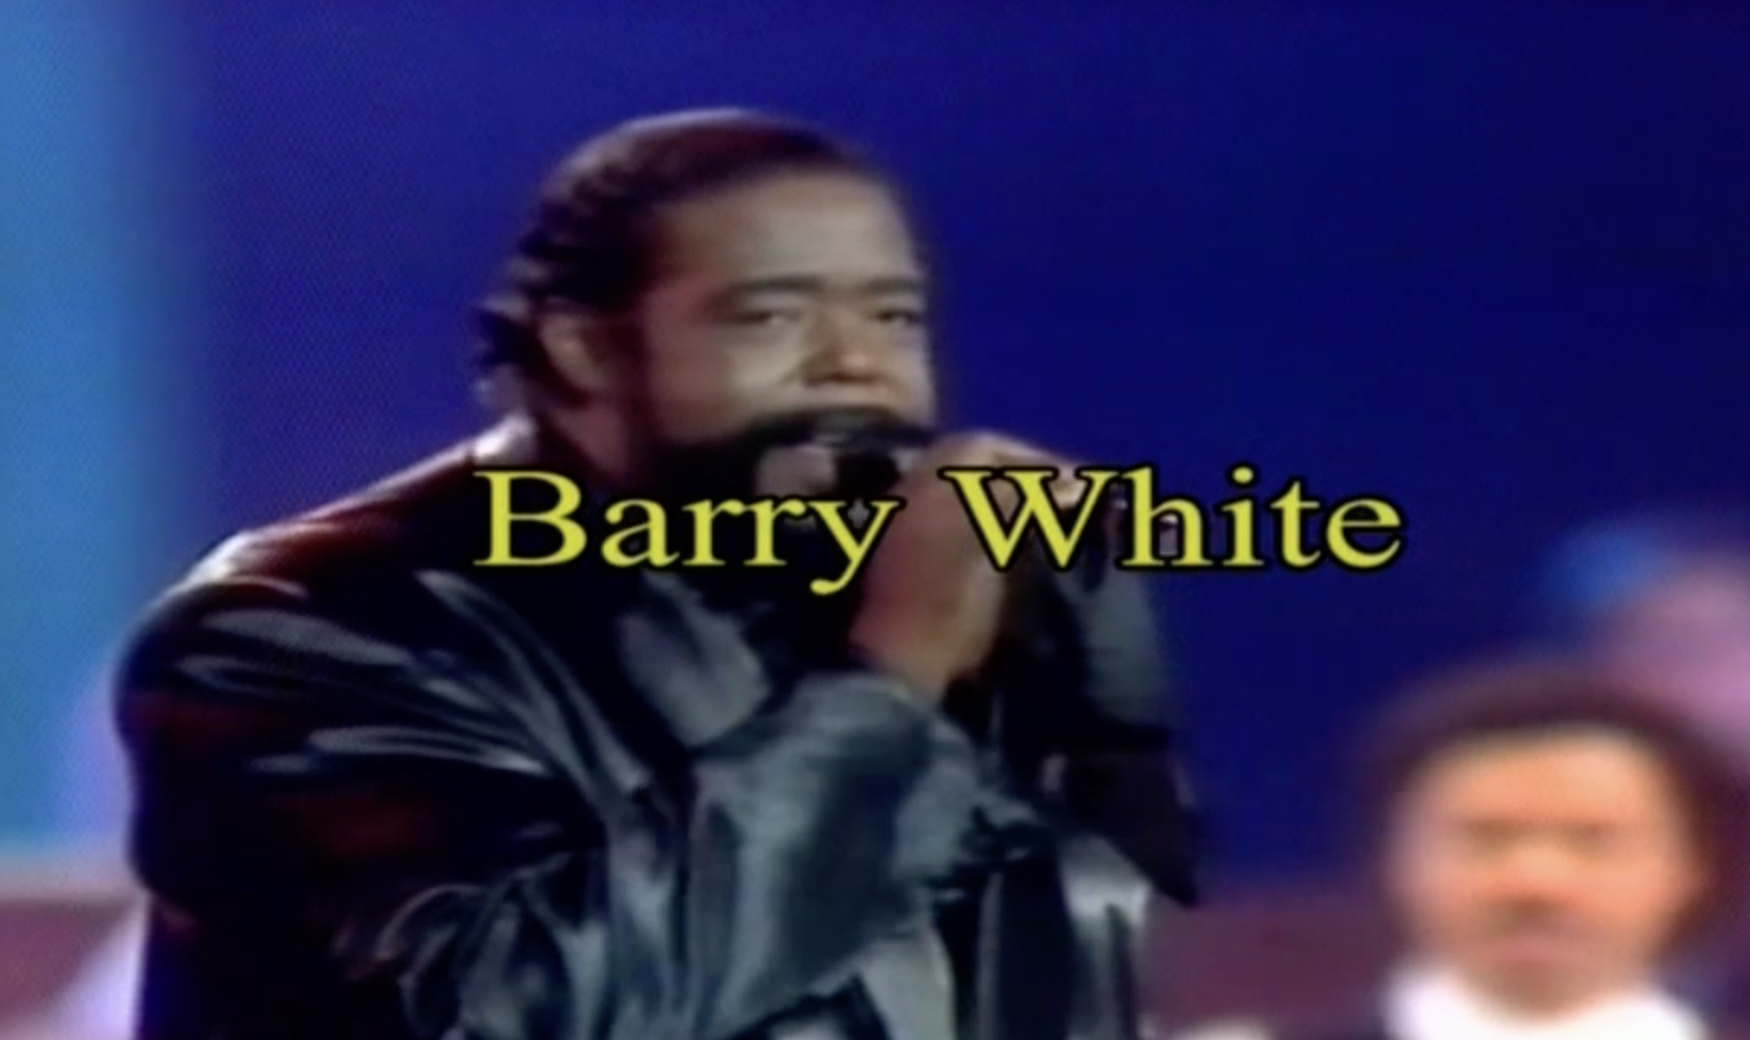 Barry White - Larger Than Life